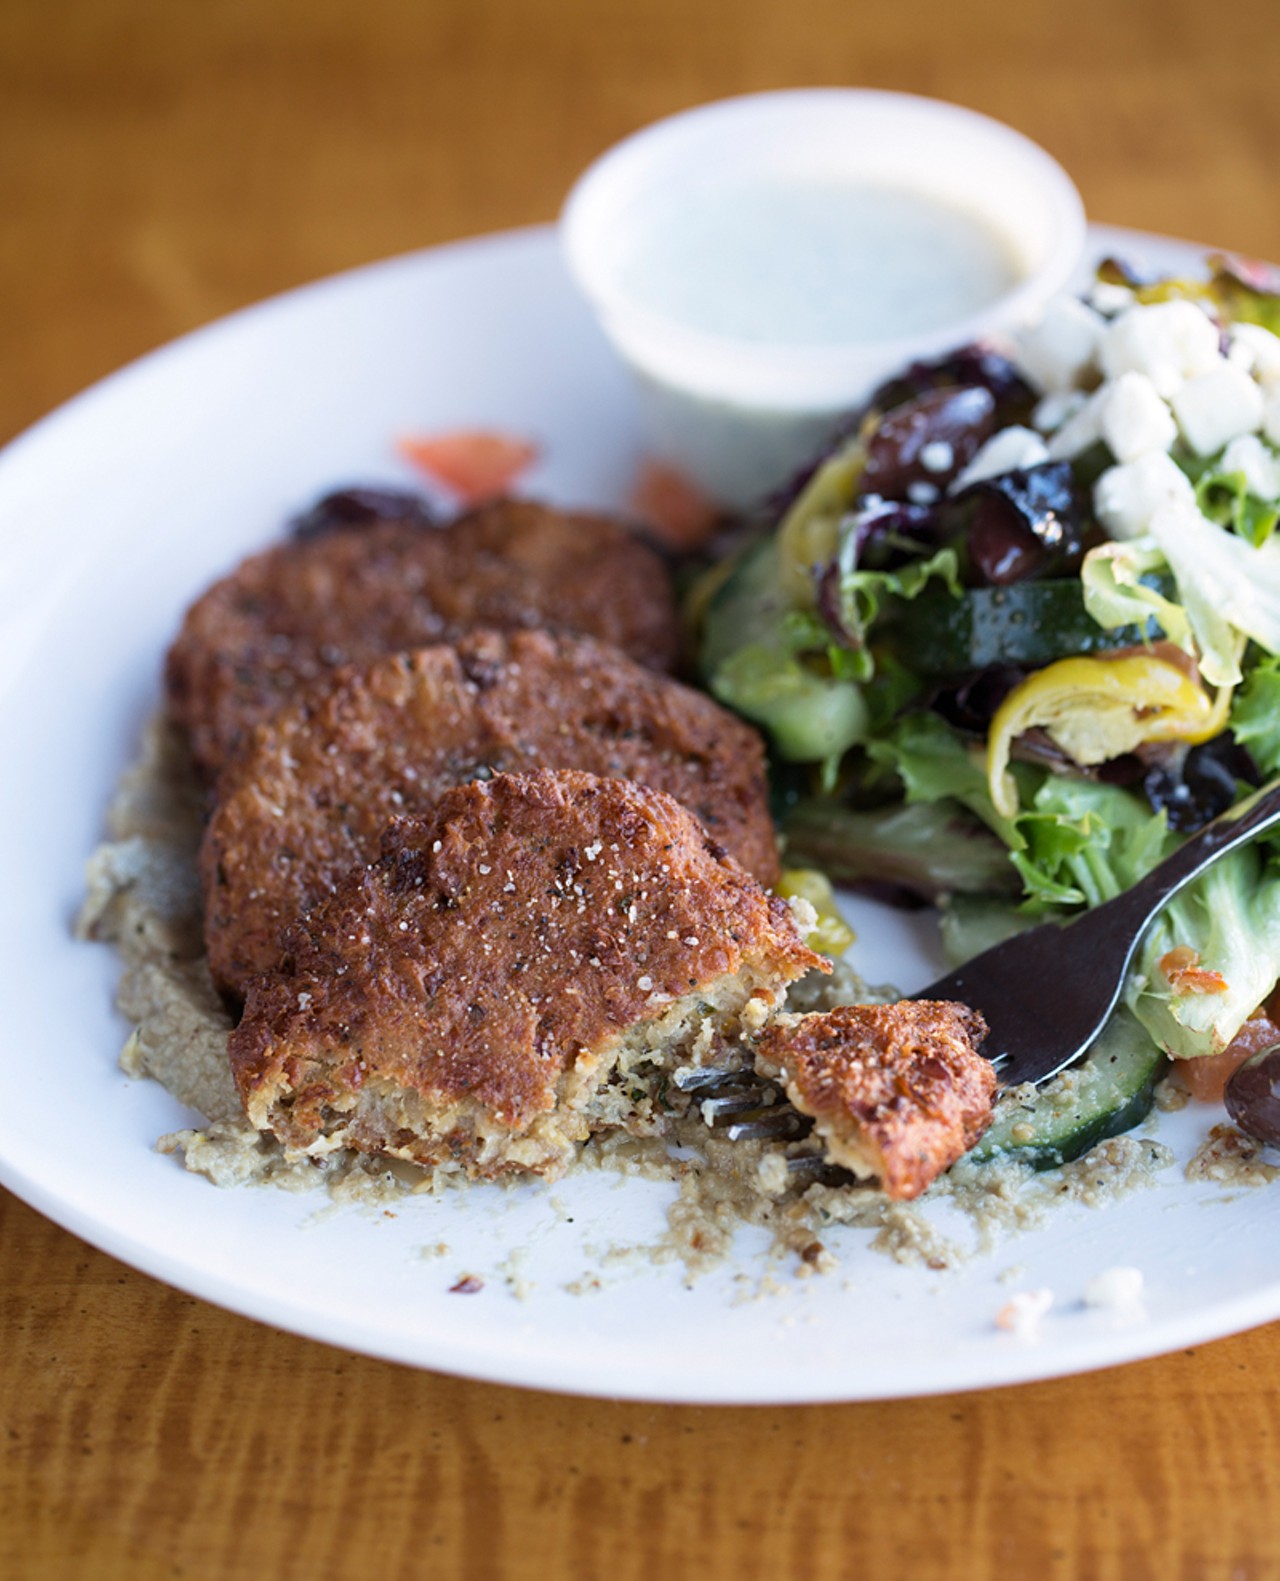 Joyia's falafel is 
served with baba ganoush, cucumbers, red onions, tomatoes, pepperoncini, feta cheese and tzatziki.